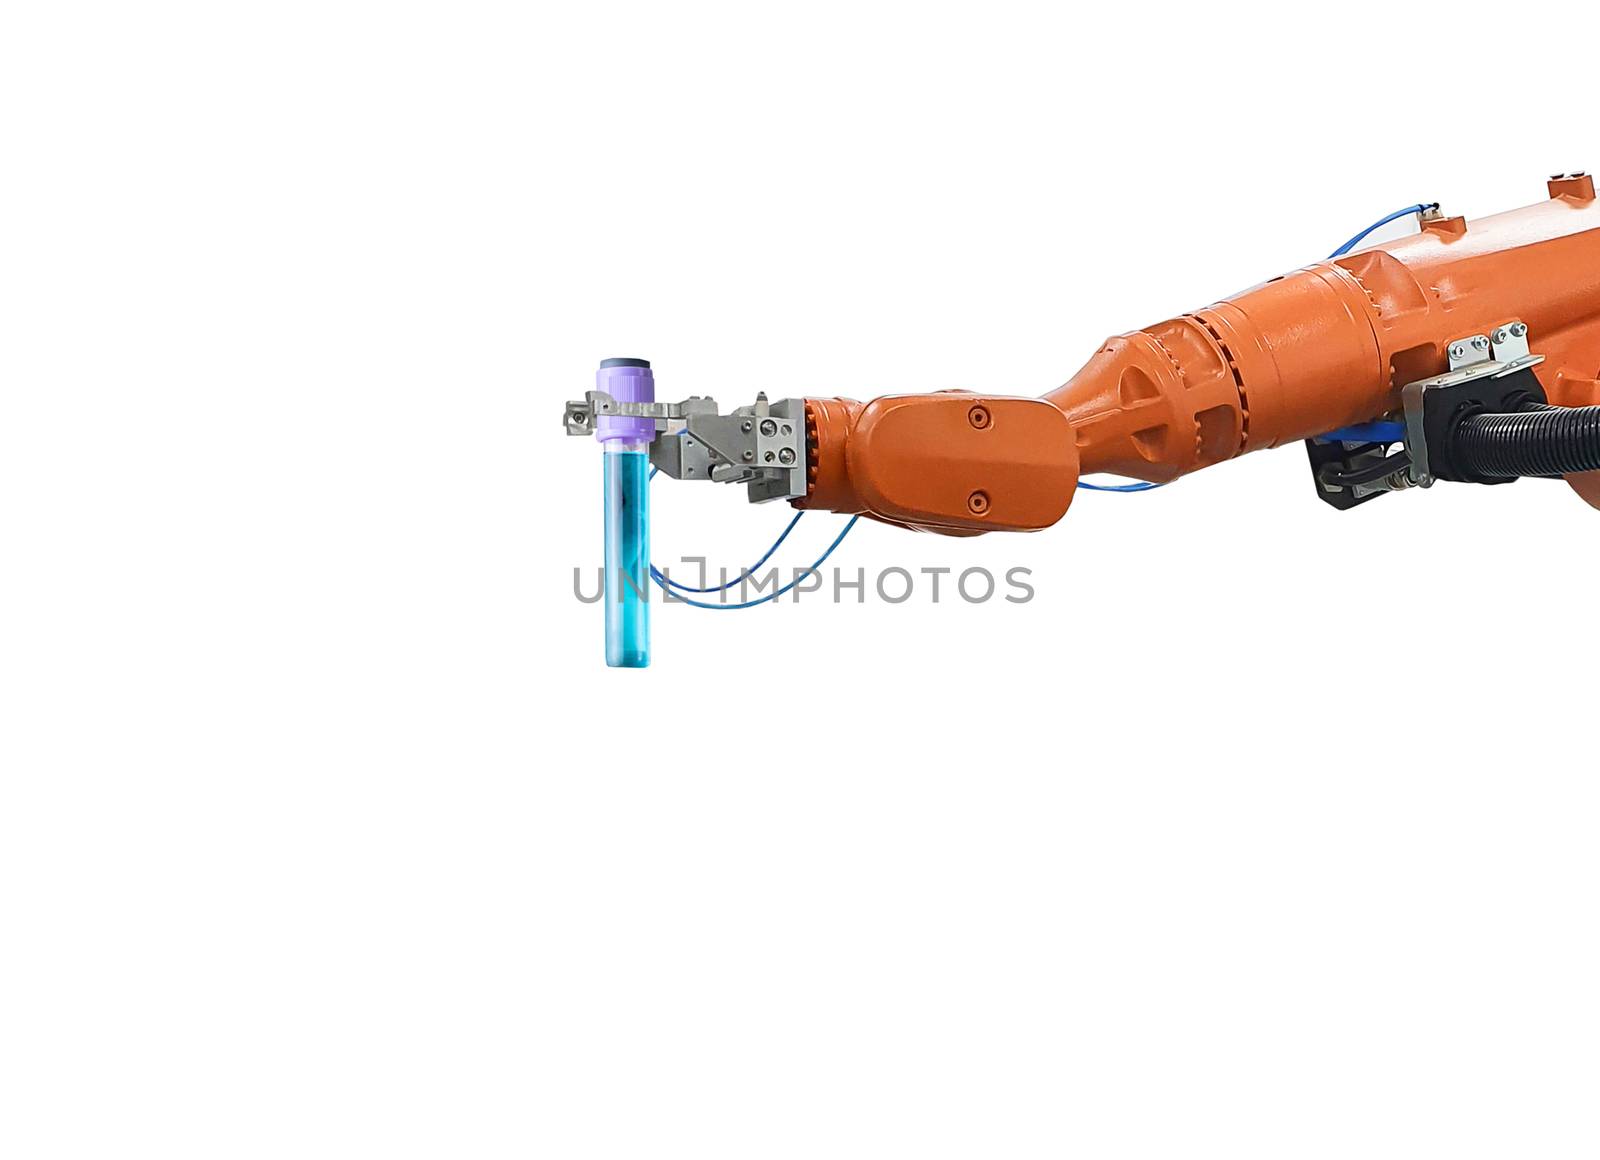 A robotic arm holding a medical test tube on a white background by sompongtom